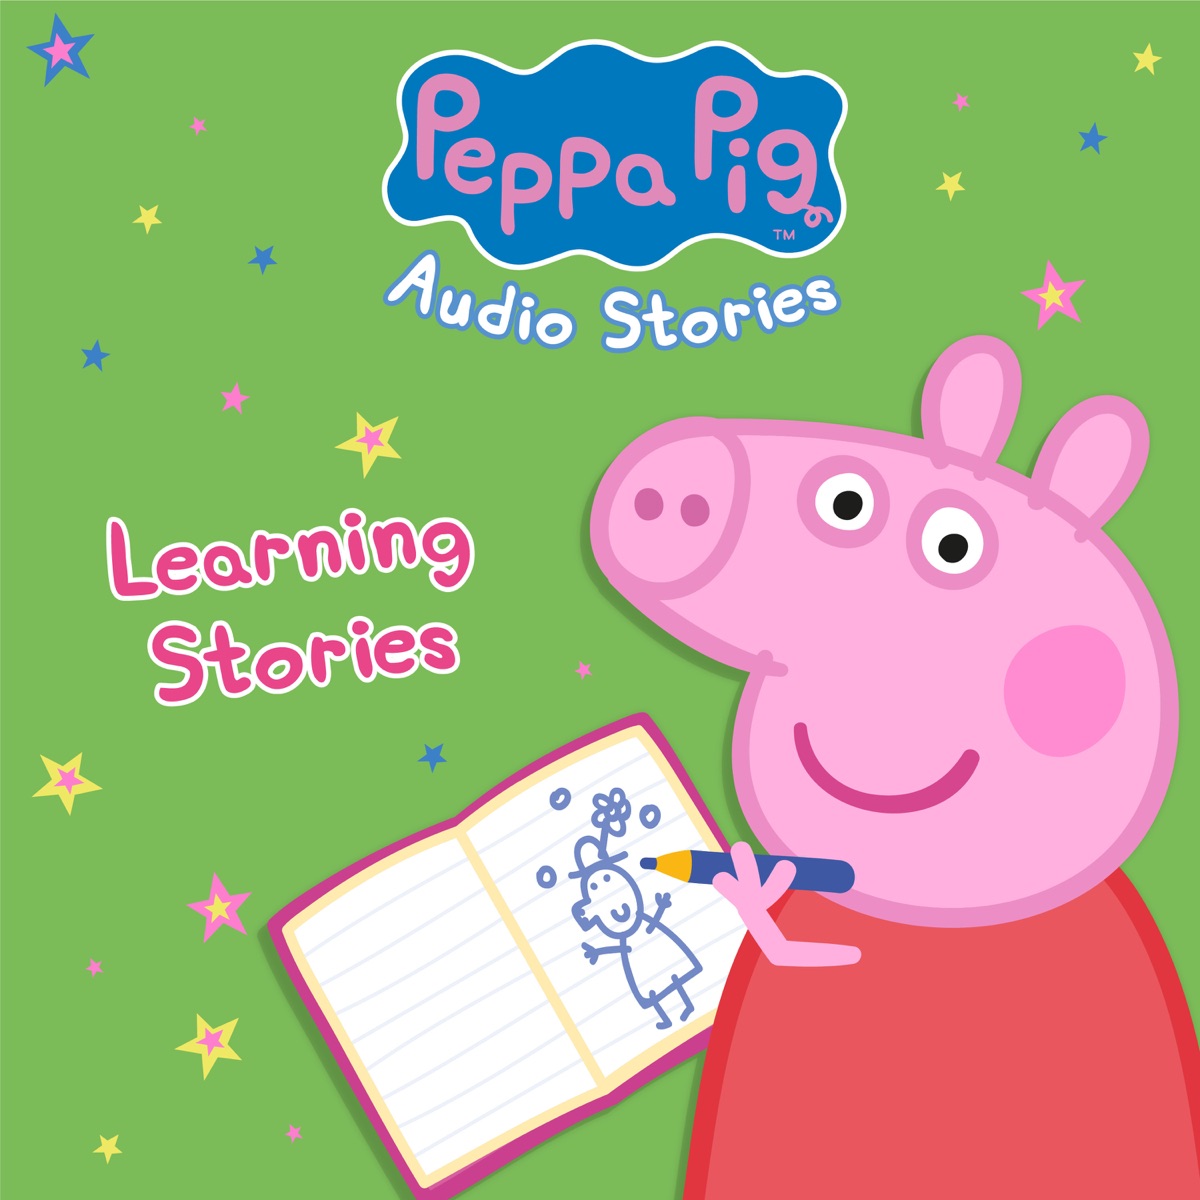 Peppa Pig: Learning Stories - EP - Album by Peppa Pig Stories - Apple Music